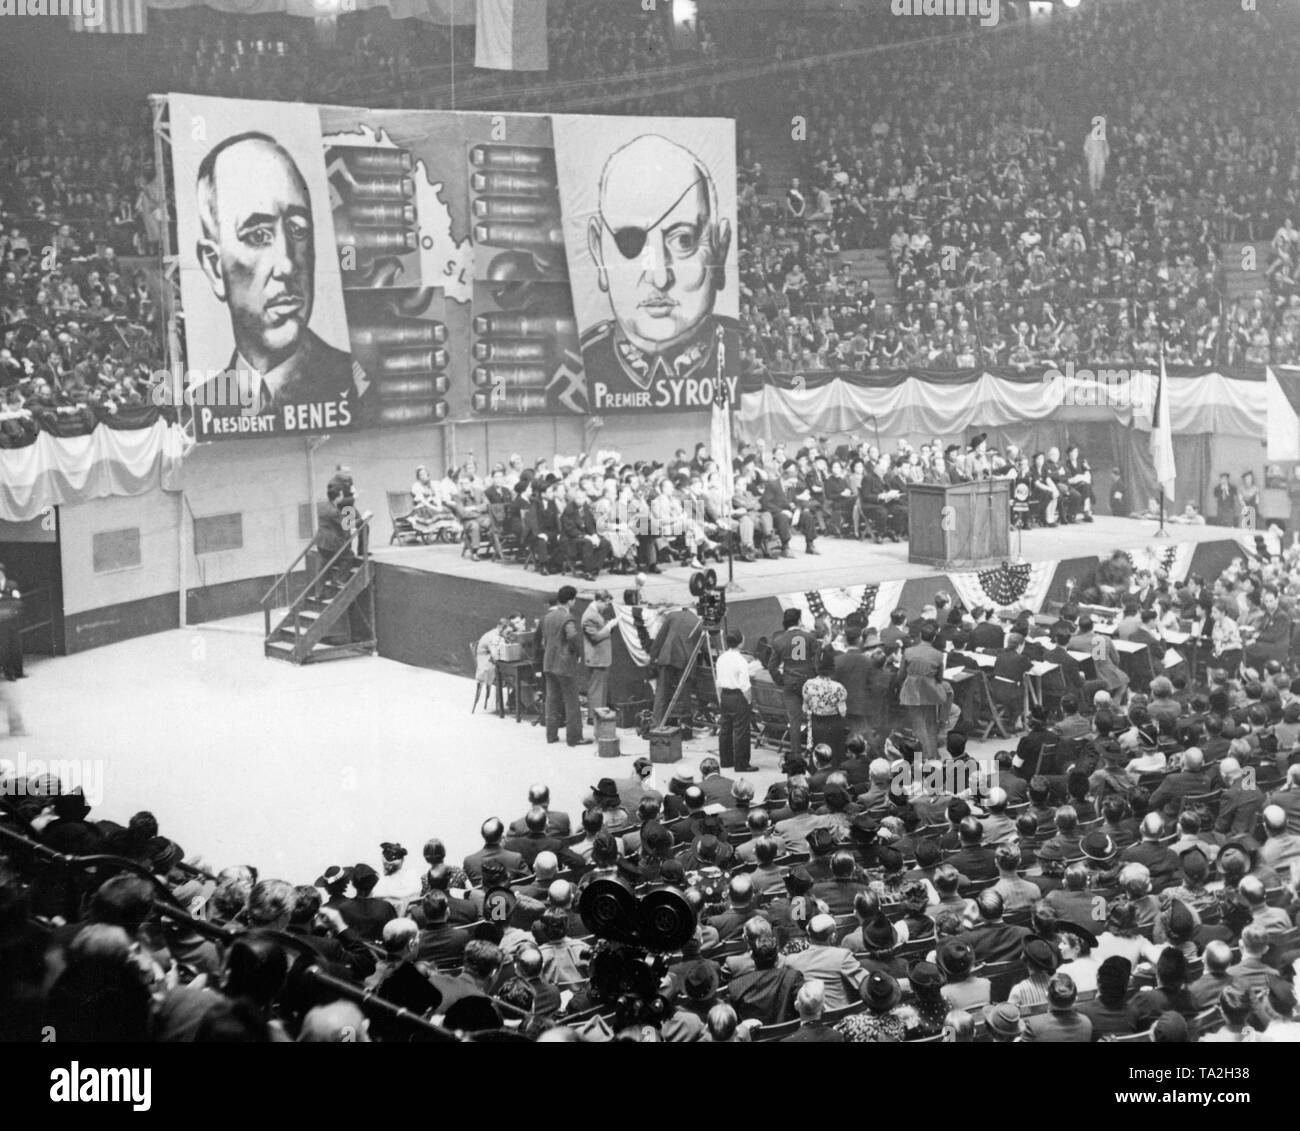 The Committee for the Salvation of Czechoslovakia meets in Madison Square Garden, New York. Among others, Thomas Mann and Dorothy Thompson give speeches at the convention. In the background, posters with the images of President Benes and Prime Minister Syrovy. Adolf Hitler provoked the Sudetenland crisis to annex the Sudetenland to the German Reich. Stock Photo